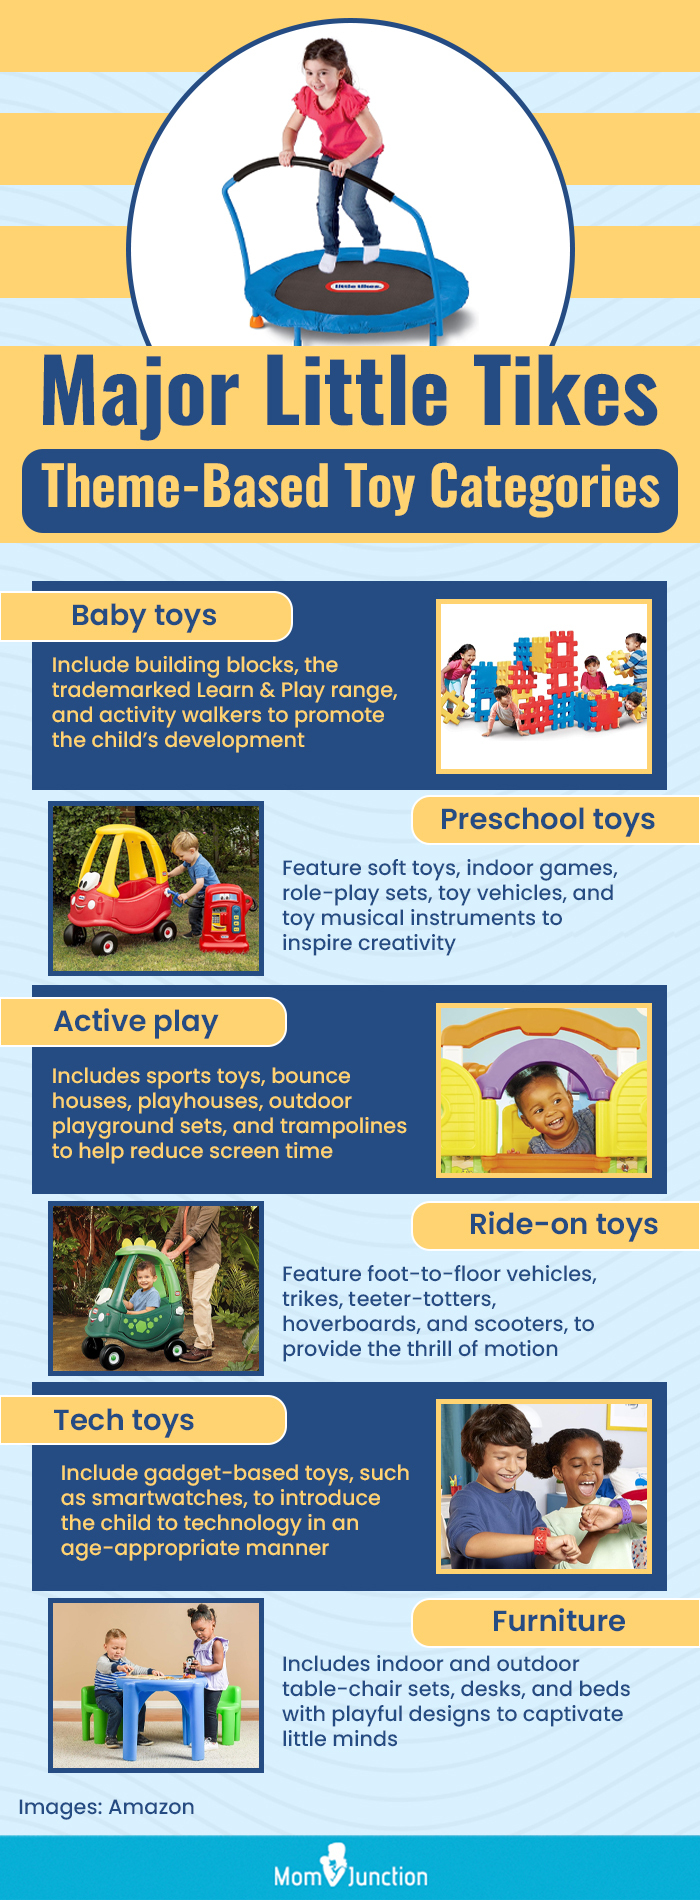 Major Little Tikes Theme Based Toy Categories(infographic)